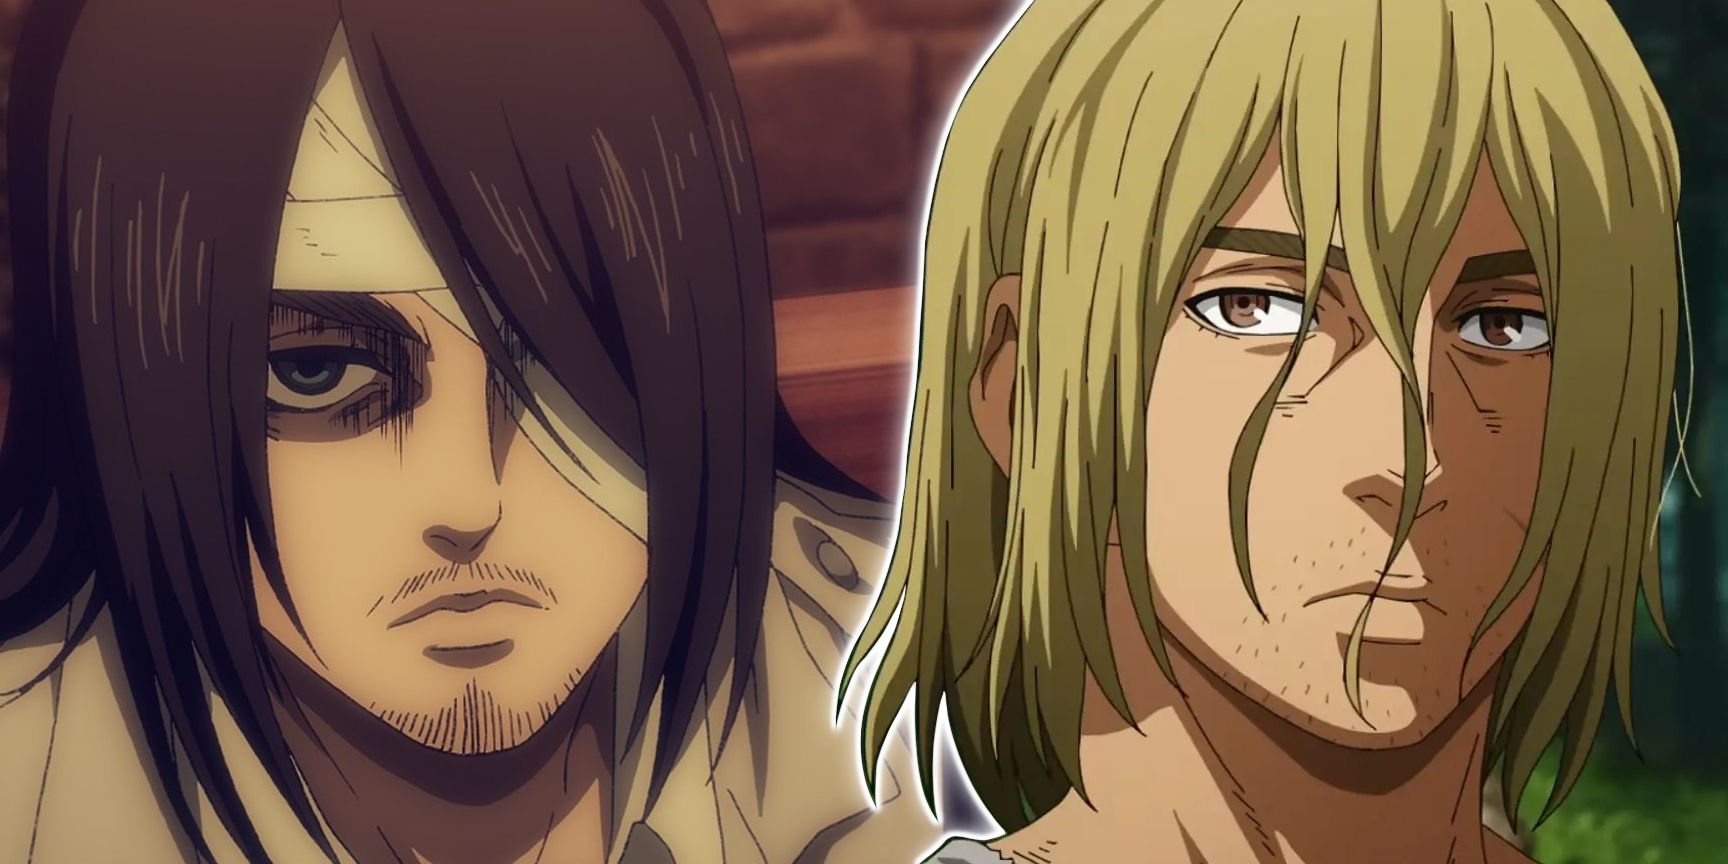 Vinland Saga's Slow-Burn Pacing Both Appeals to and Bores Viewers